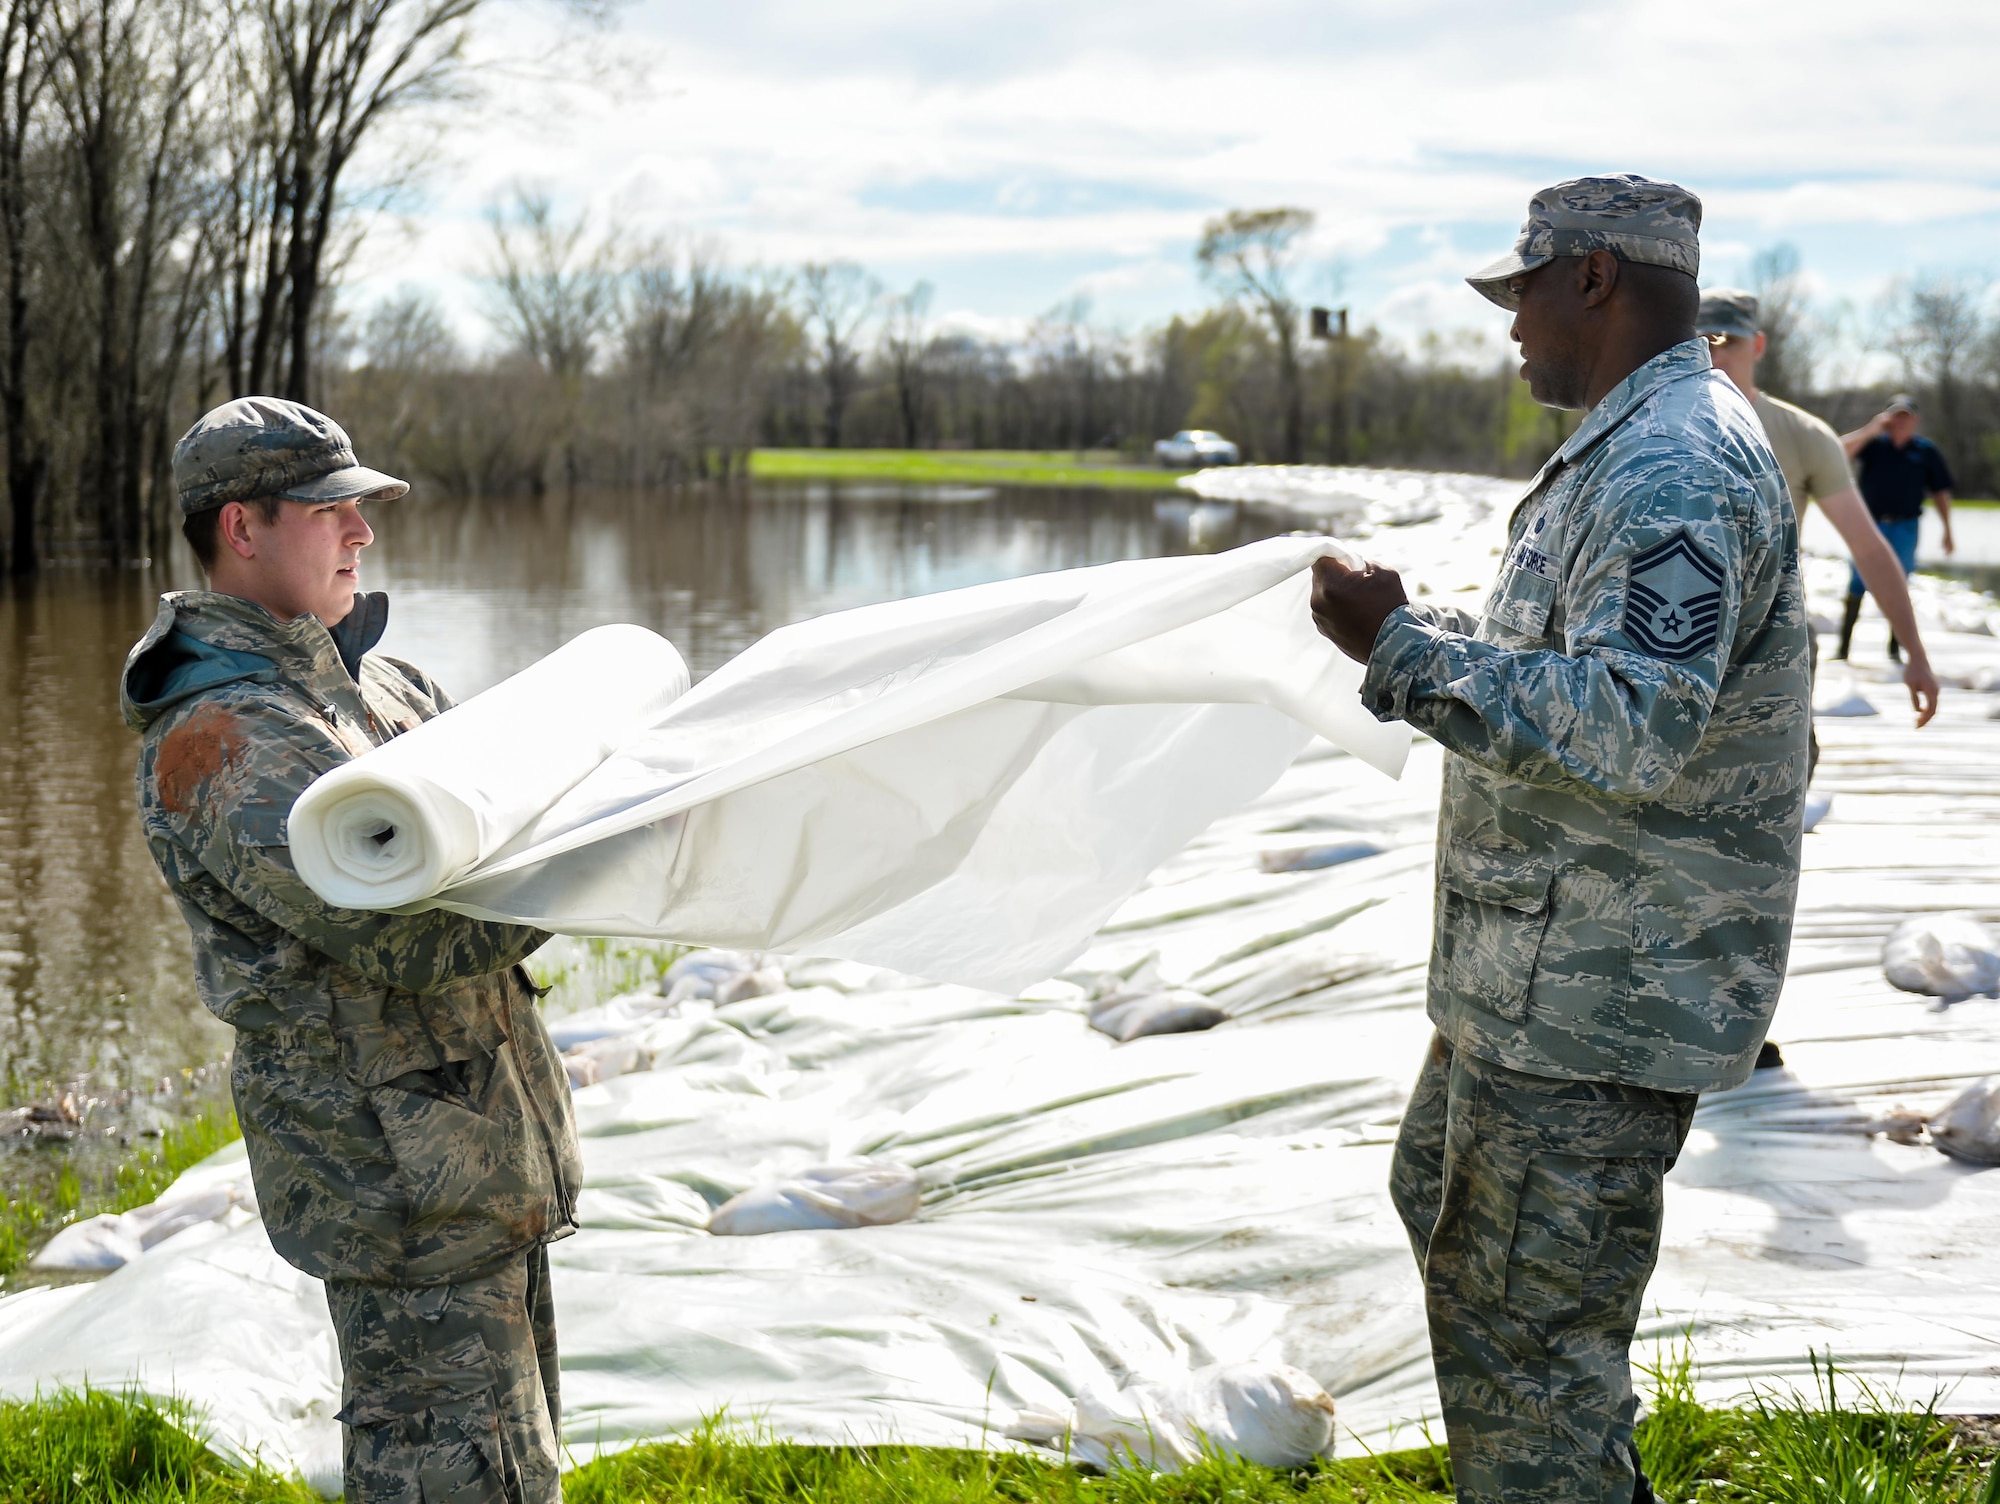 Airmen from the 2nd Logistics Readiness Squadron lay out a plastic sheet over a levee in Bossier City, La., March 10, 2016. Plastic sheets provided a water barrier keeping water from reaching the top of the Red Chute Bayou levee. The cover protected the levee from rain and rising waters. (U.S. Air Force photo/Senior Airman Mozer O. Da Cunha)